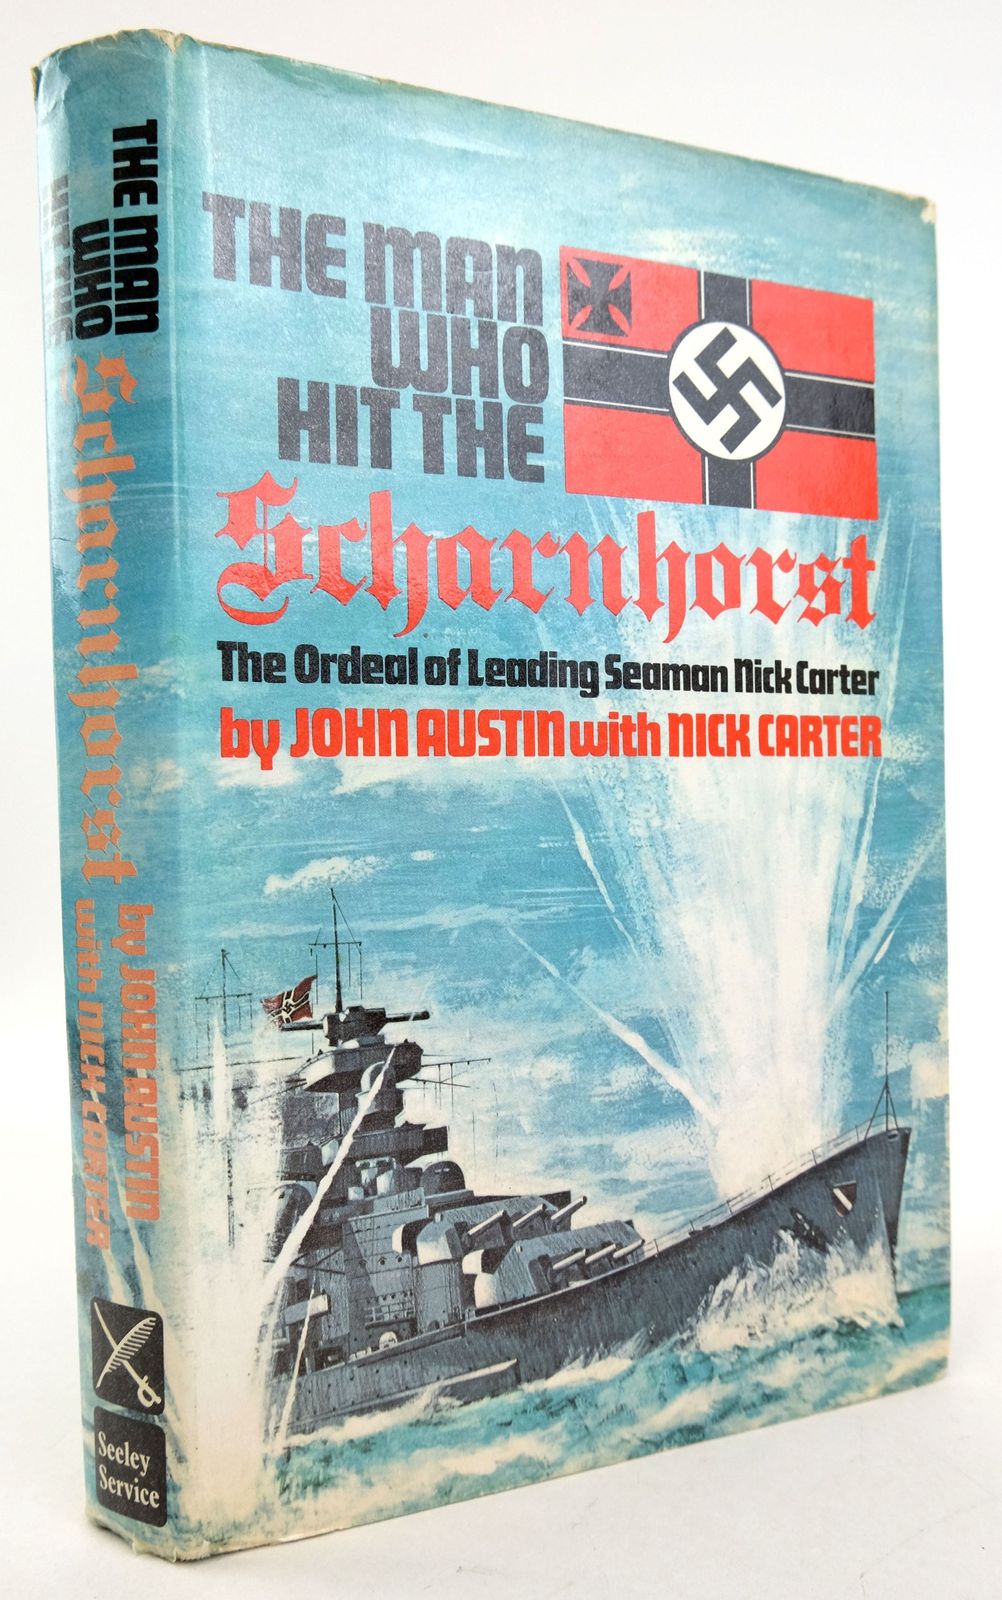 Photo of THE MAN WHO HIT THE SCHARNHORST: THE ORDEAL OF LEADING-SEAMAN NICK CARTER written by Austin, John
Carter, Nick published by Seeley Service & Co. (STOCK CODE: 1819887)  for sale by Stella & Rose's Books